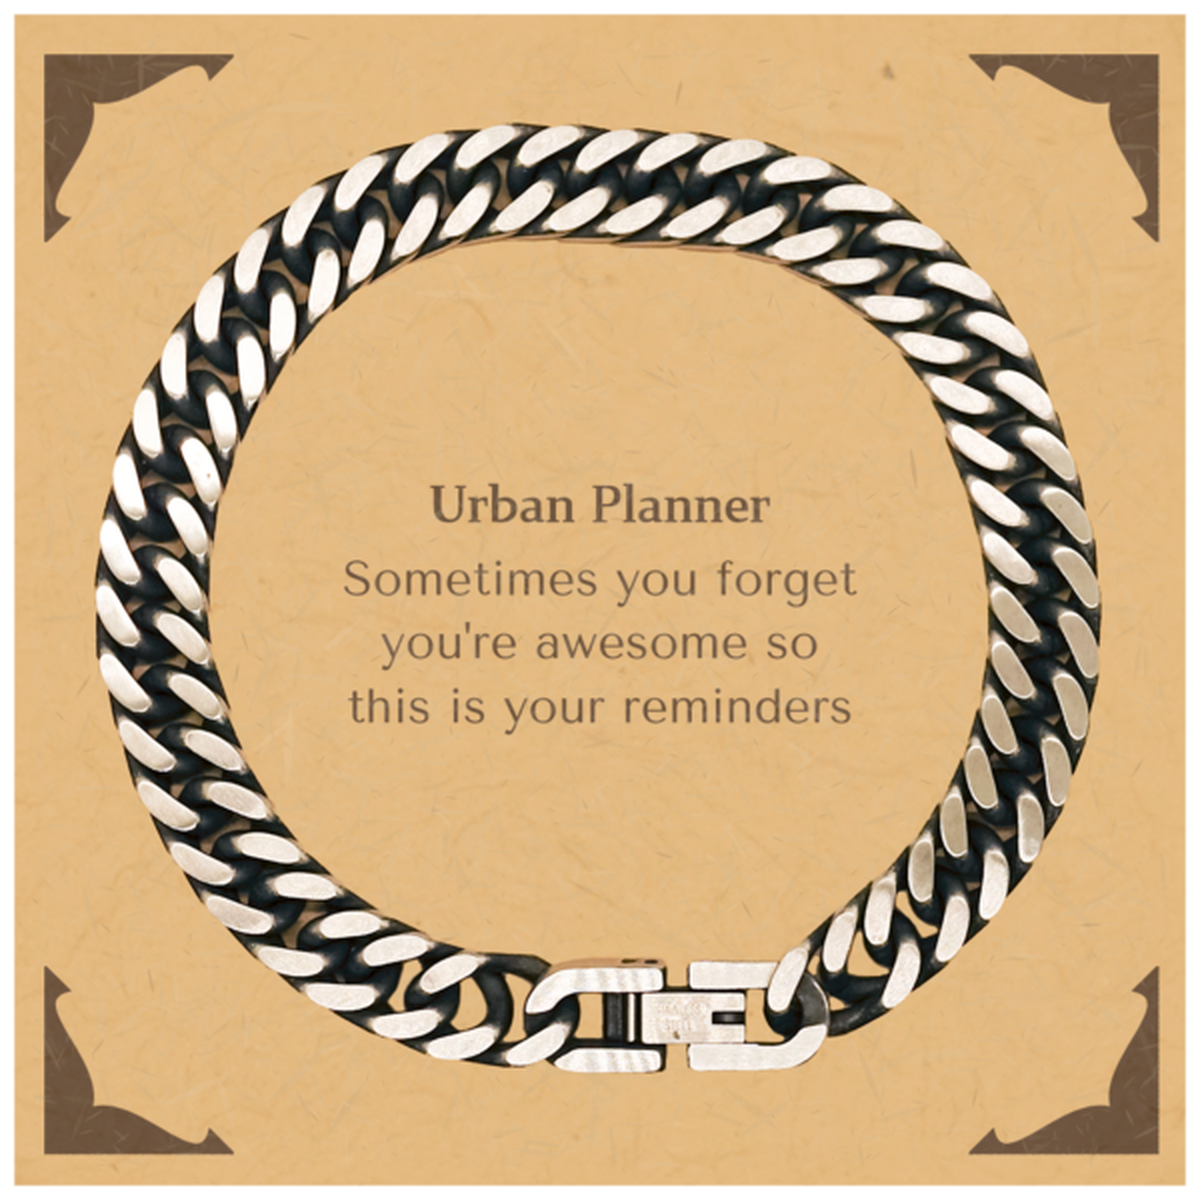 Sentimental Urban Planner Cuban Link Chain Bracelet, Urban Planner Sometimes you forget you're awesome so this is your reminders, Graduation Christmas Birthday Gifts for Urban Planner, Men, Women, Coworkers